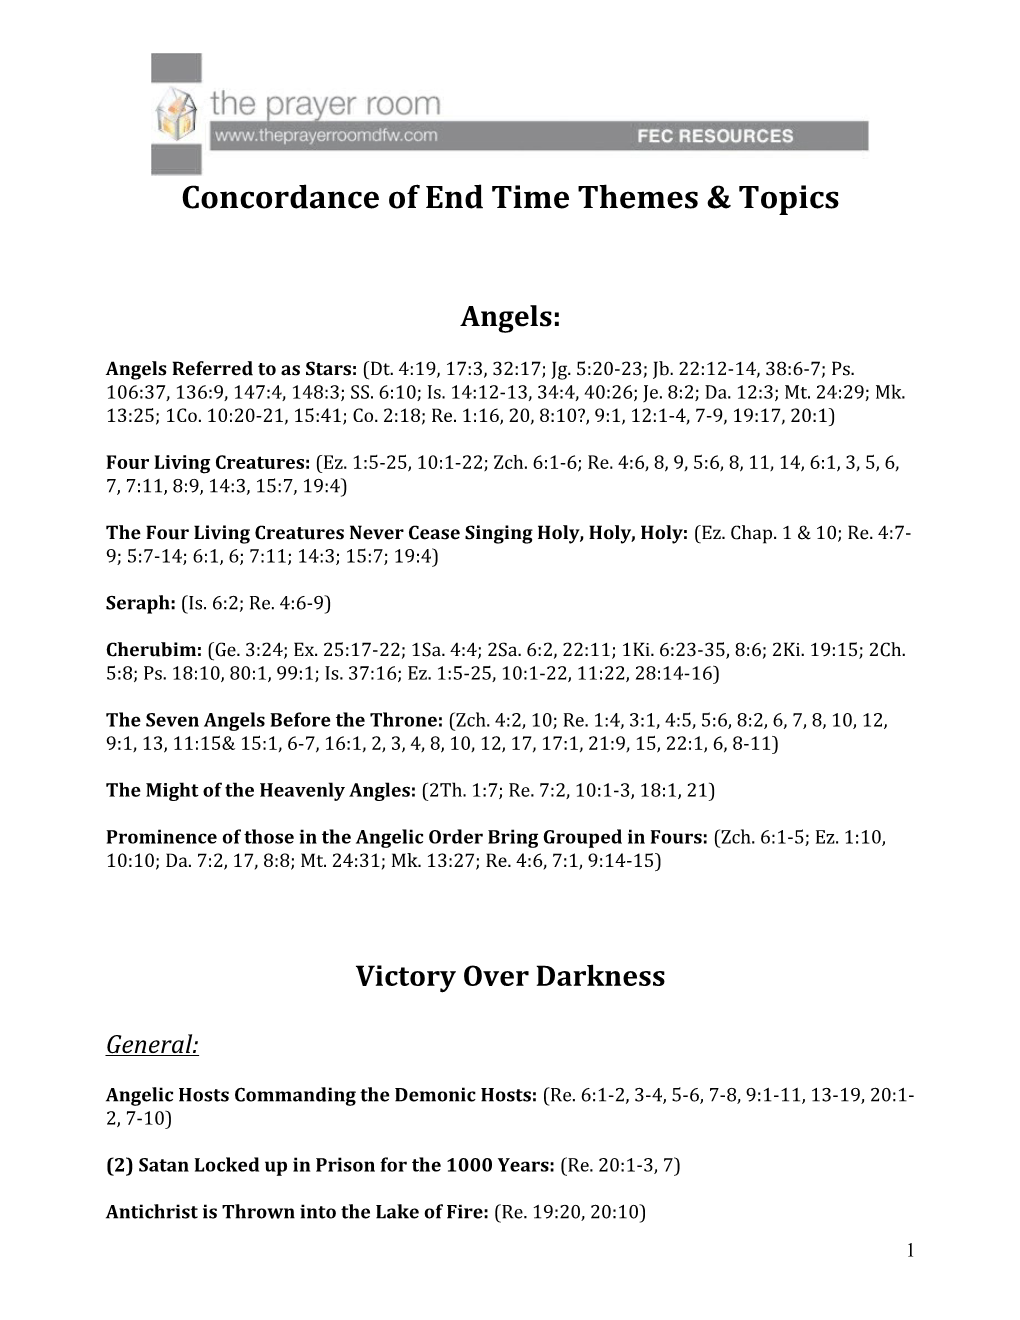 End-Times Concepts and Scriptures